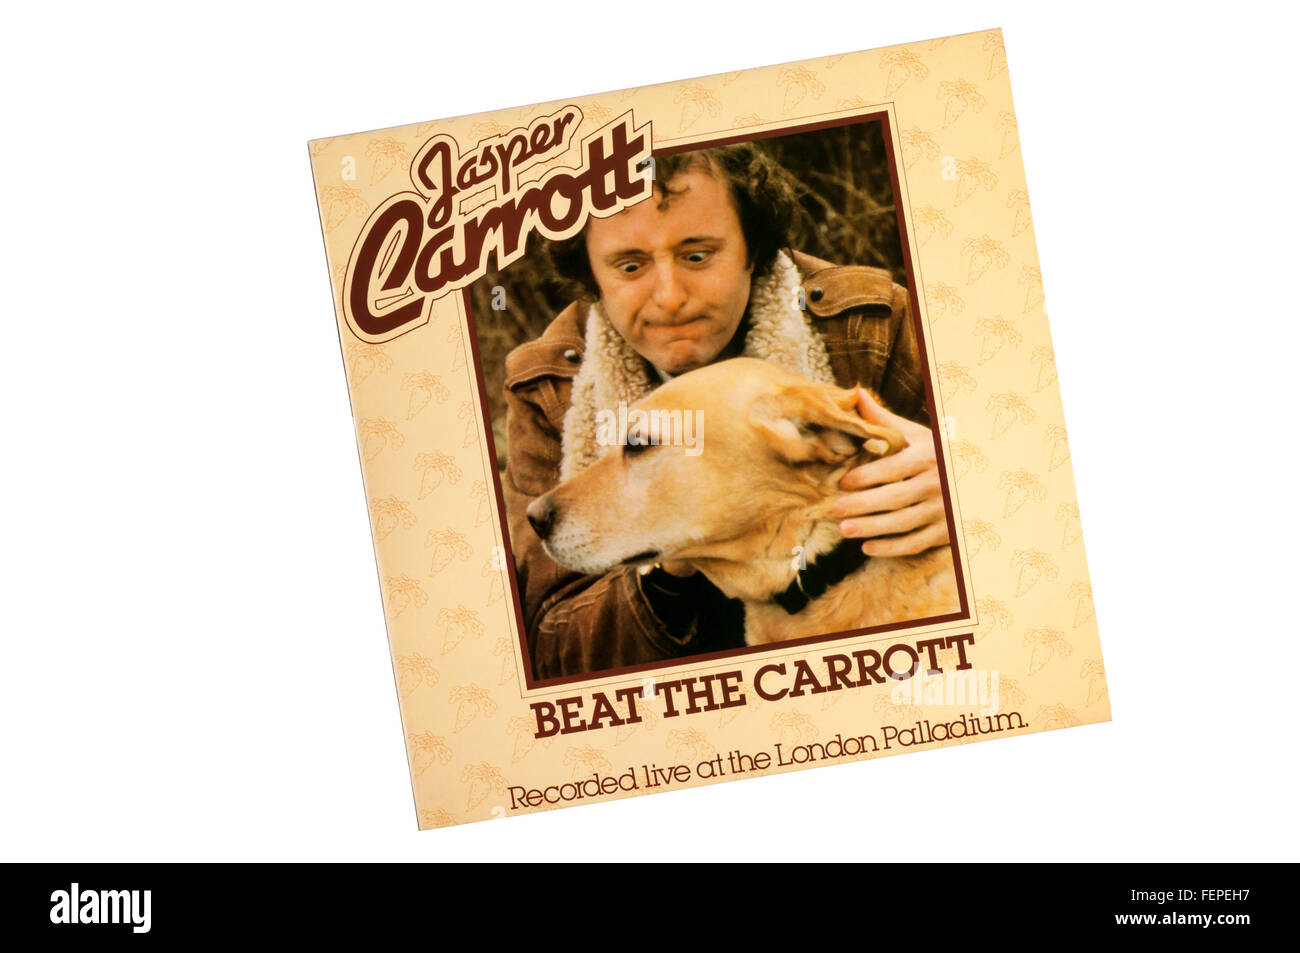 Beat the Carrott is a record of comedian Jasper Carrott performing live at the London Palladium.  It was released in 1981. Stock Photo